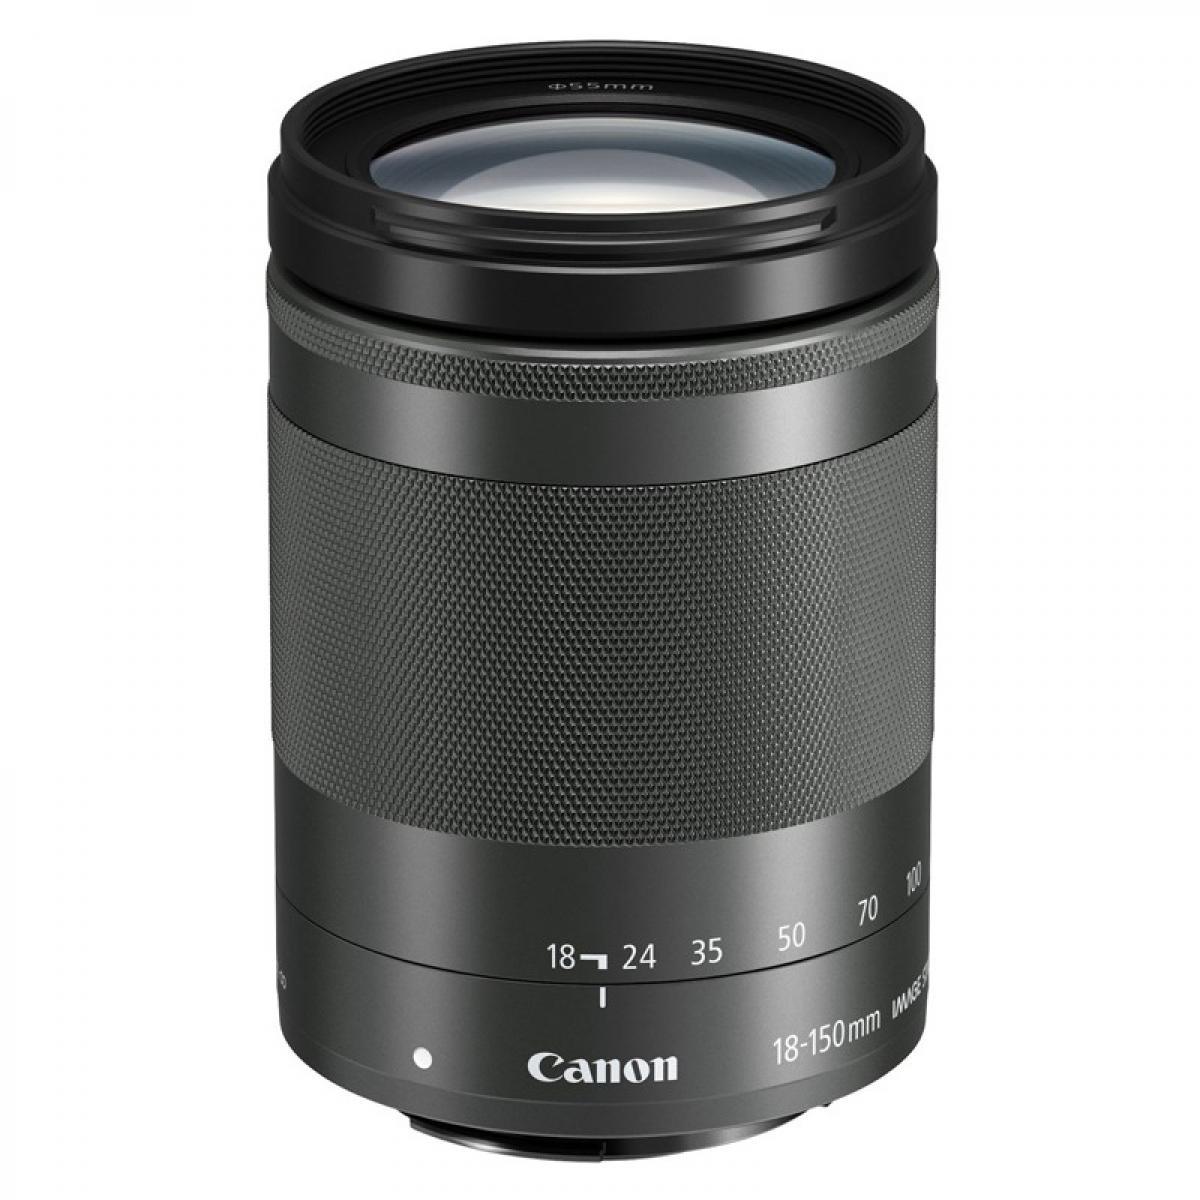 Canon - CANON Objectif EF-M 18-150mm f/3.5-6.3 IS STM Graphite Garanti 2 ans - Objectif Photo